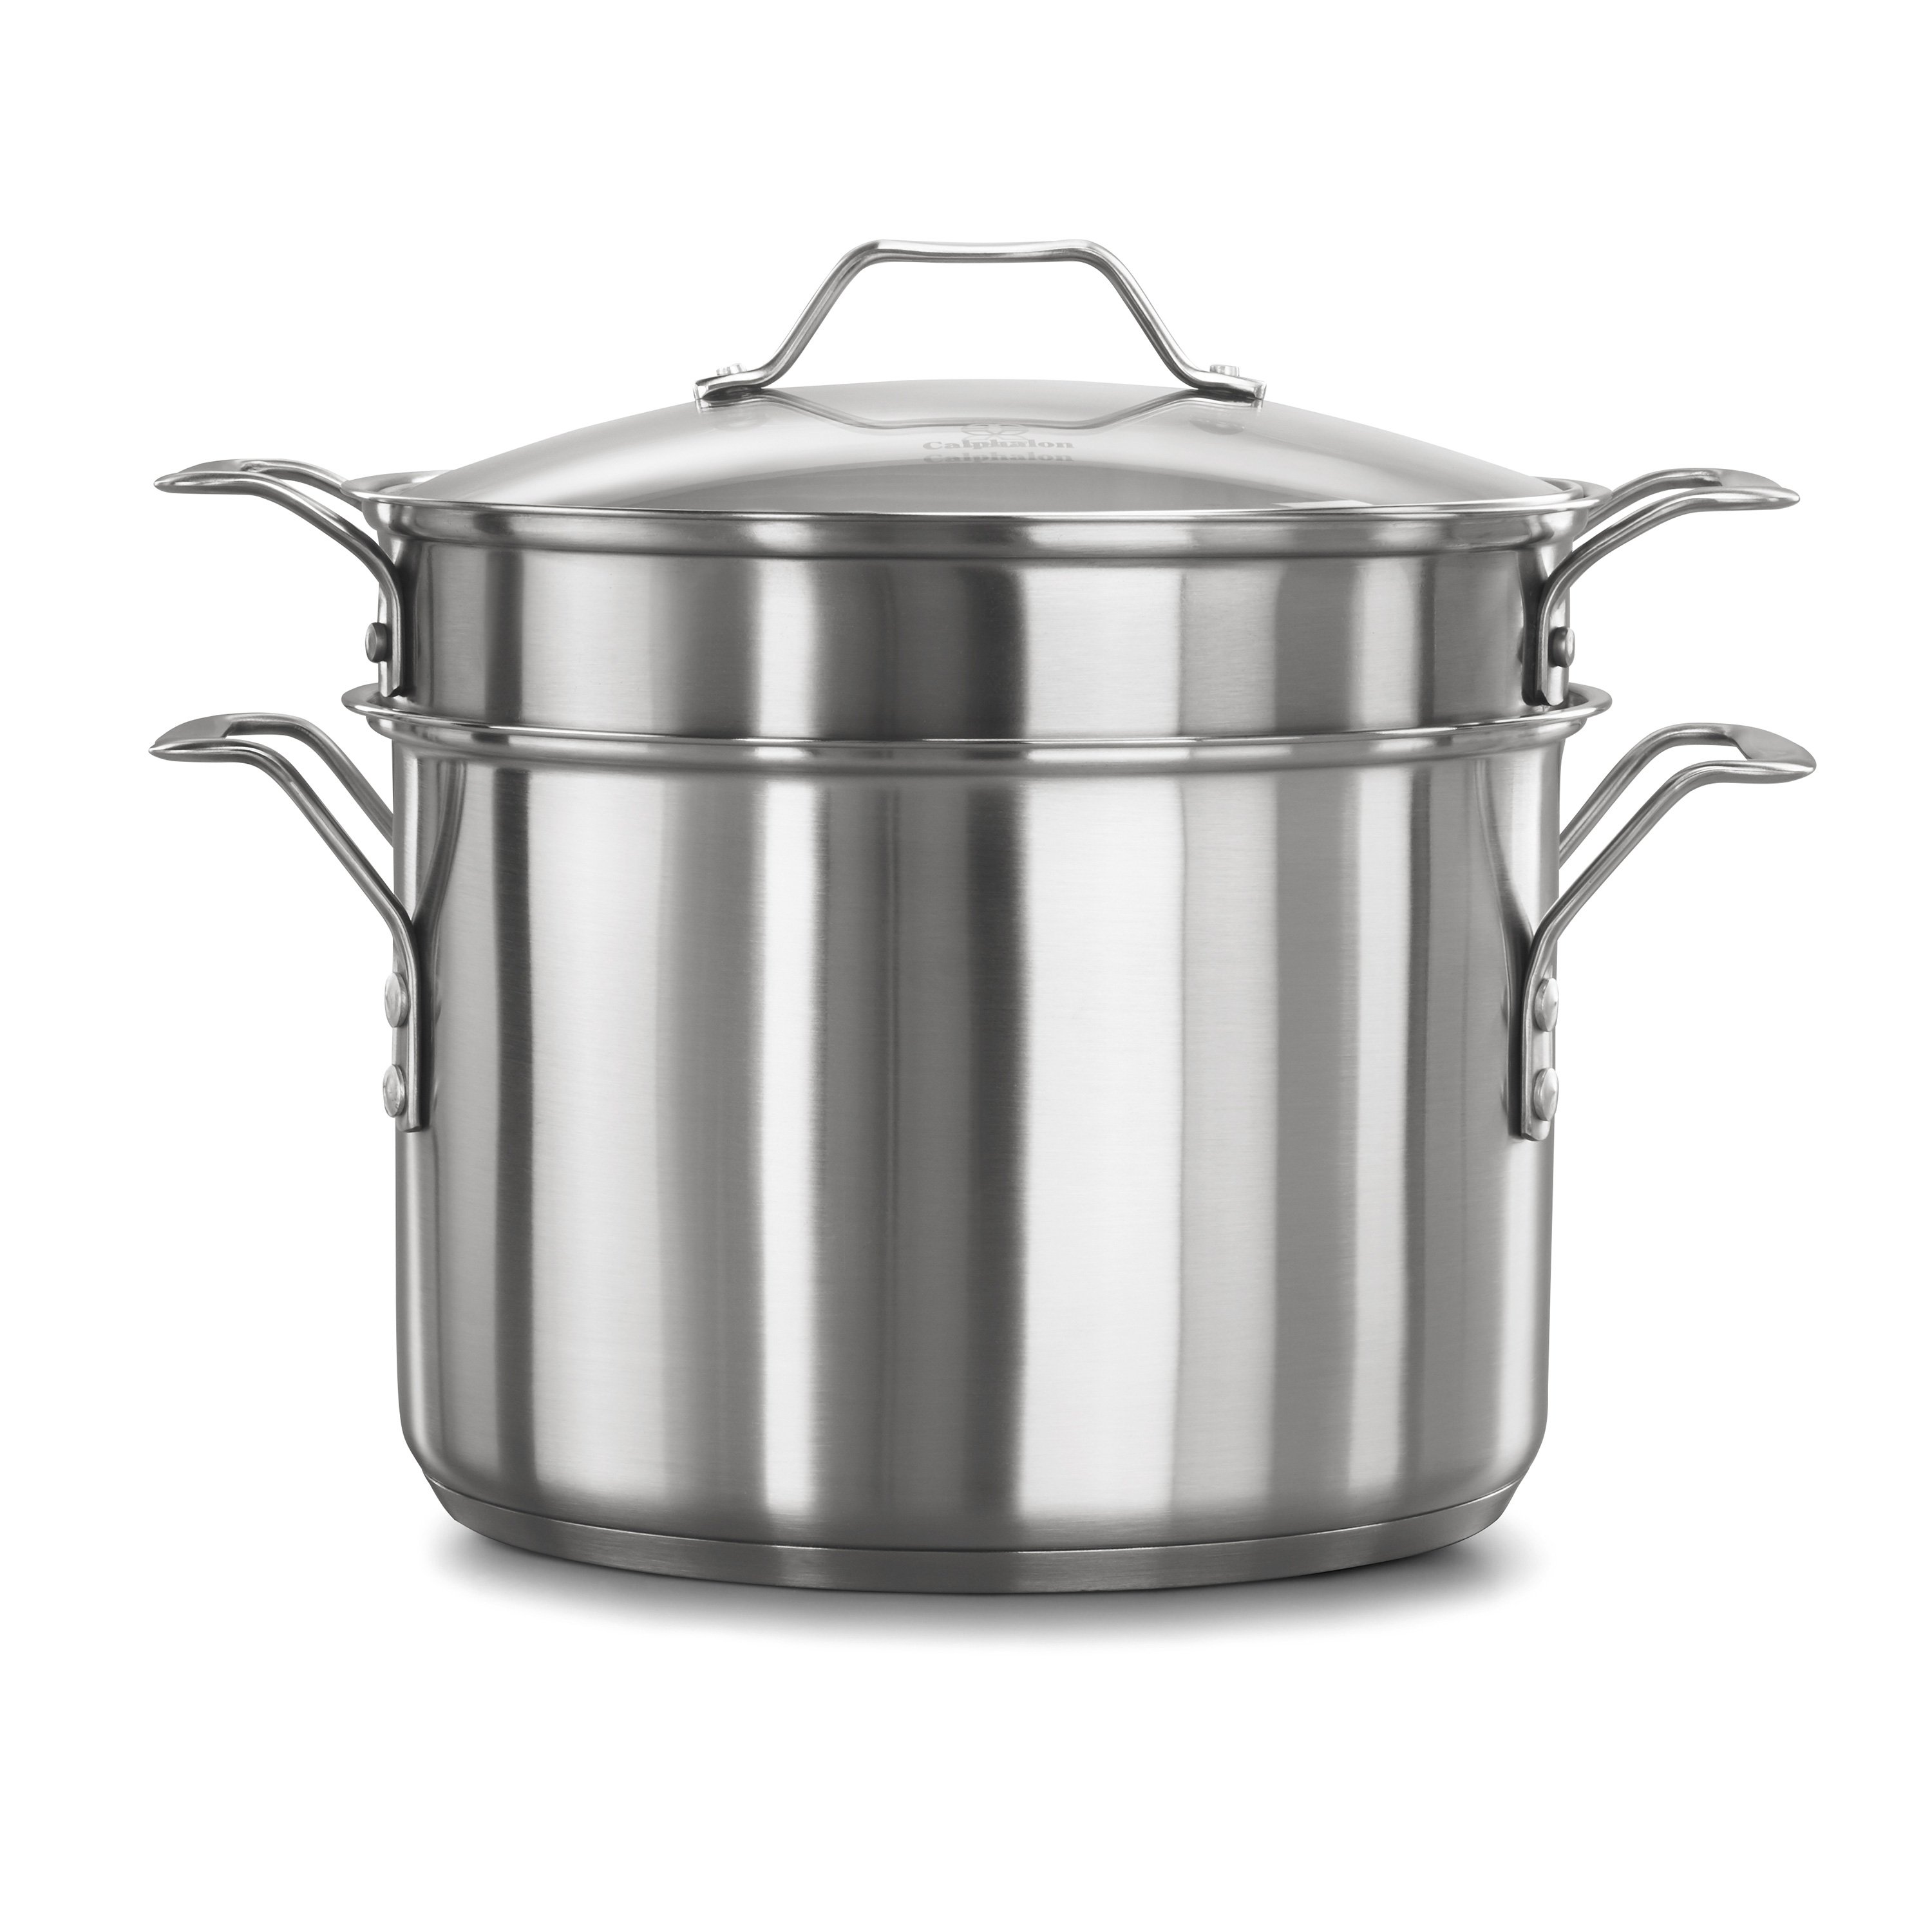 Cook N Home Pasta Pot with Strainer Lid 8-Quart, Stainless Steel Pasta